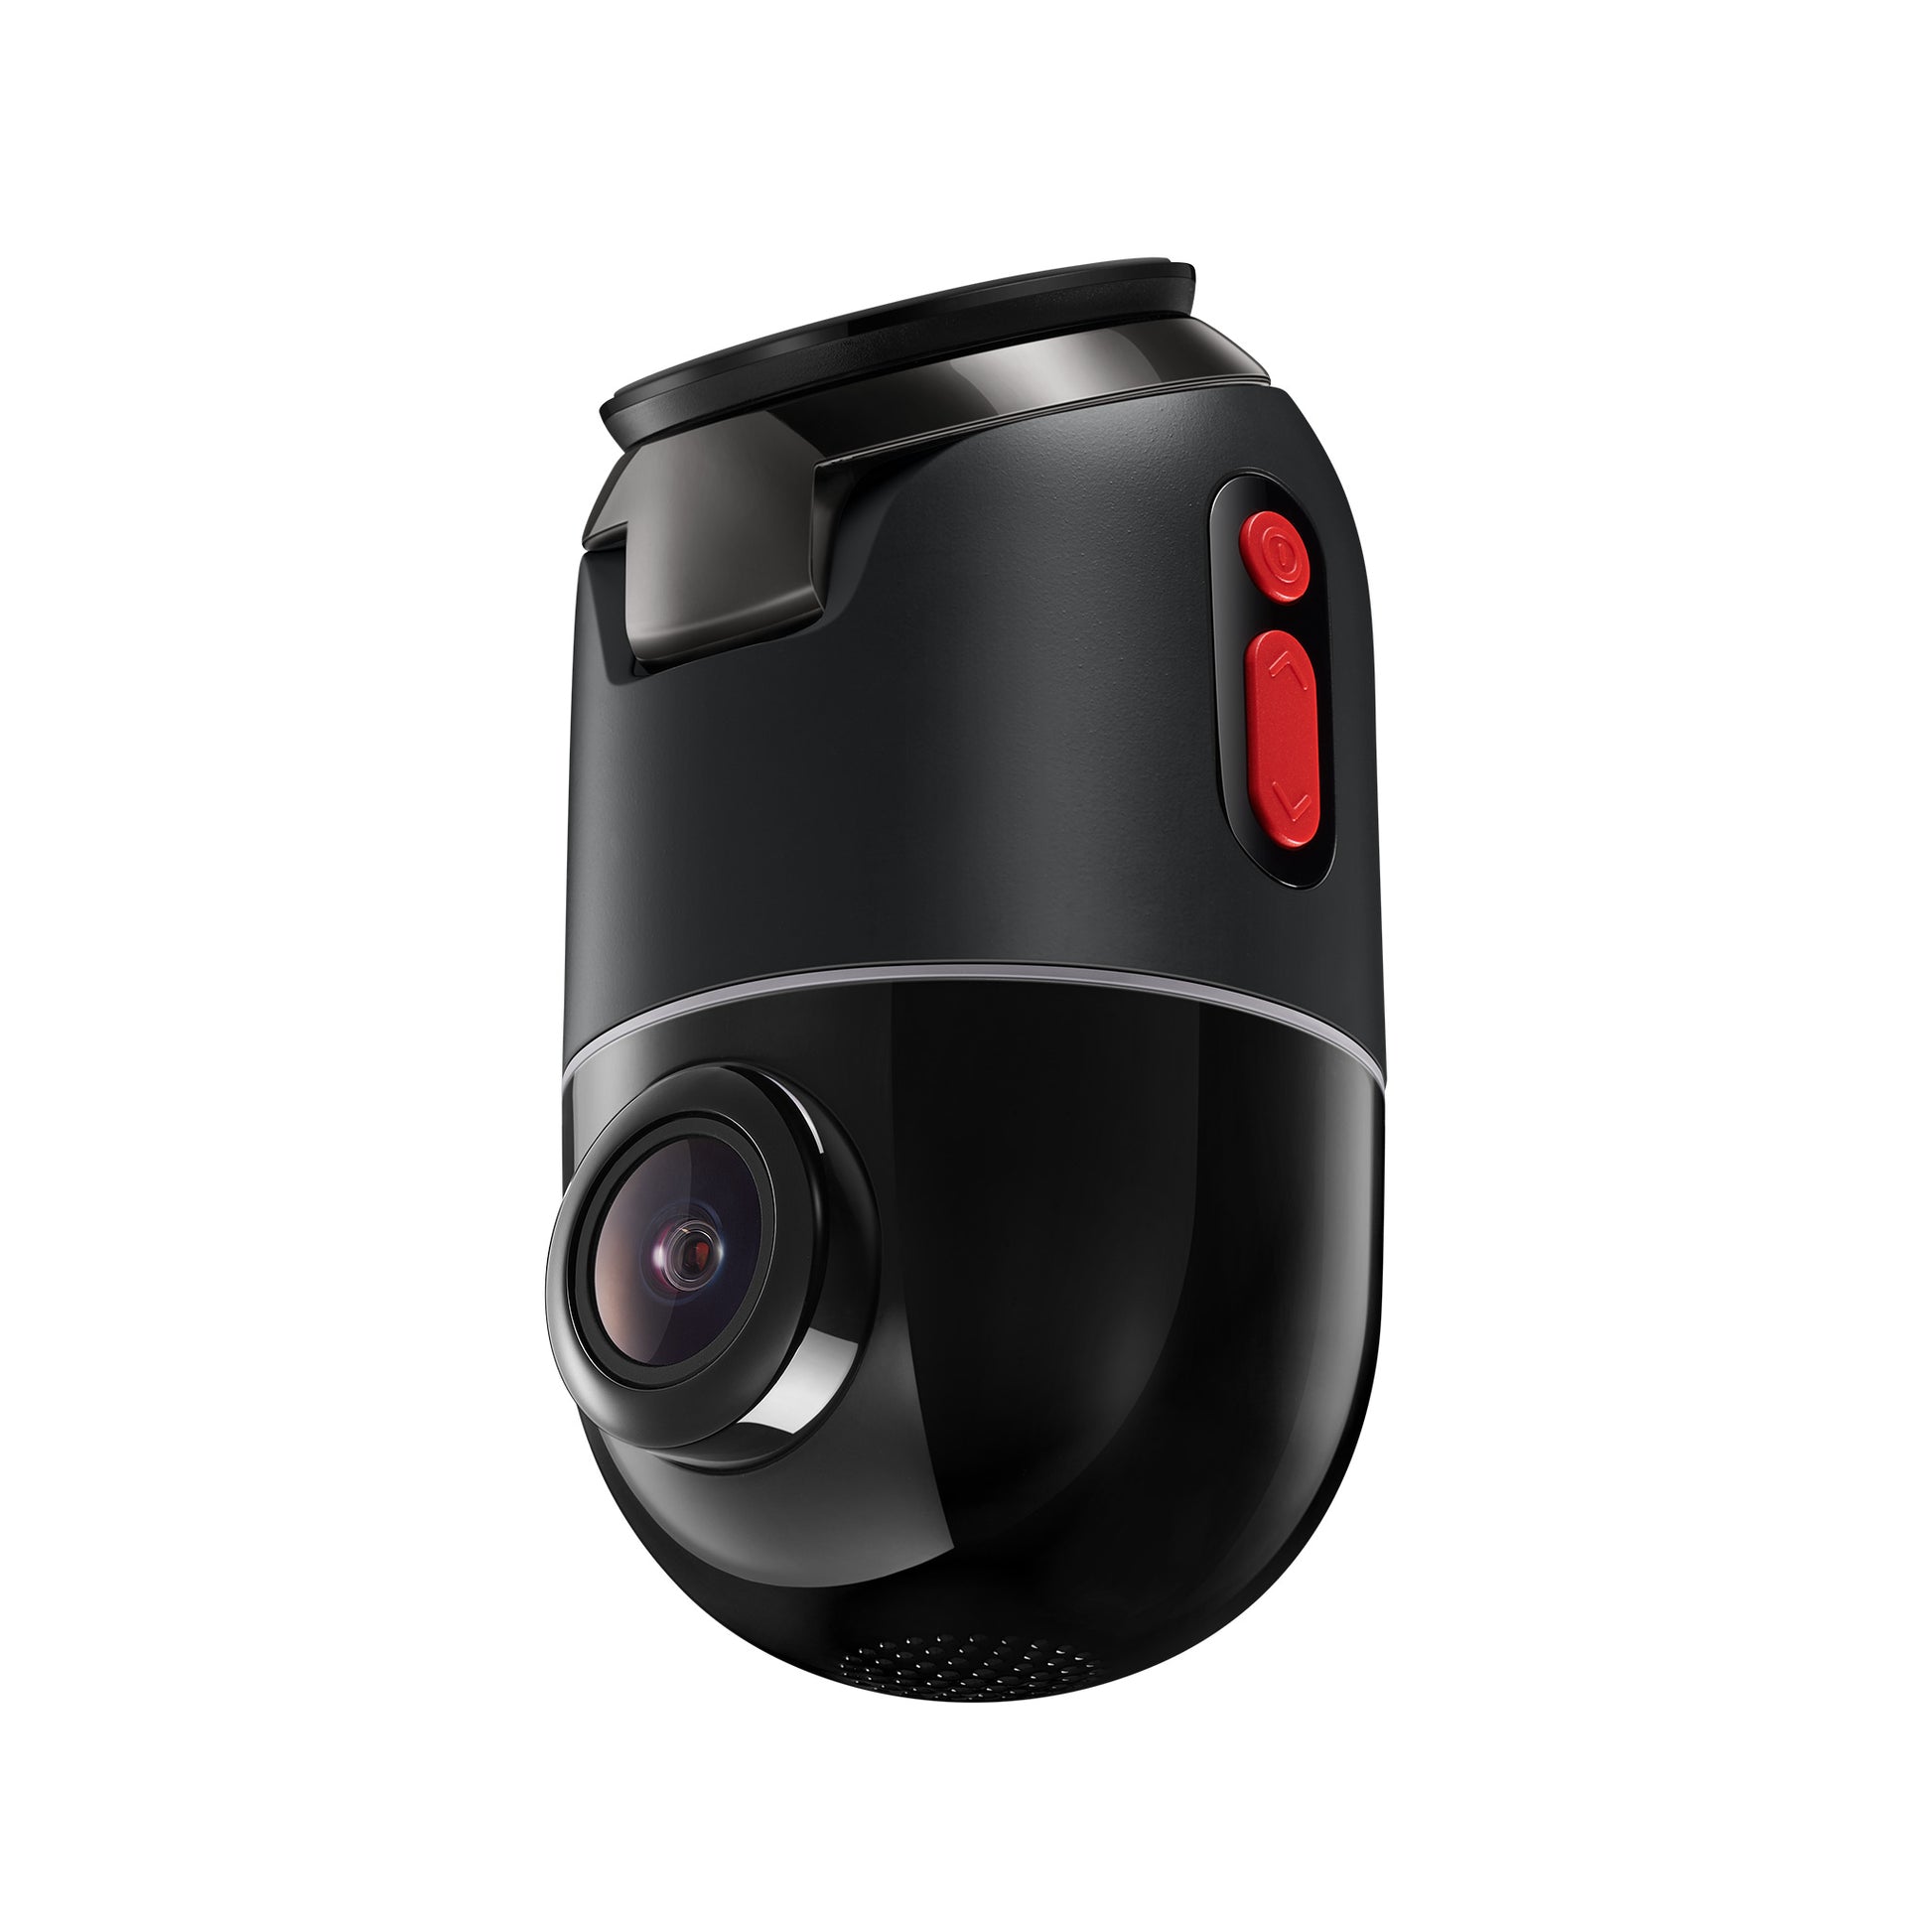 70mai Dash Cam Omni, 360° Rotating, Superior Night Vision, Bulit-in 128GB  eMMC Storage, Time-Lapse Recording, 24H Parking Mode, AI Motion Detection,  1080P Full HD, Built-in GPS, App Control 